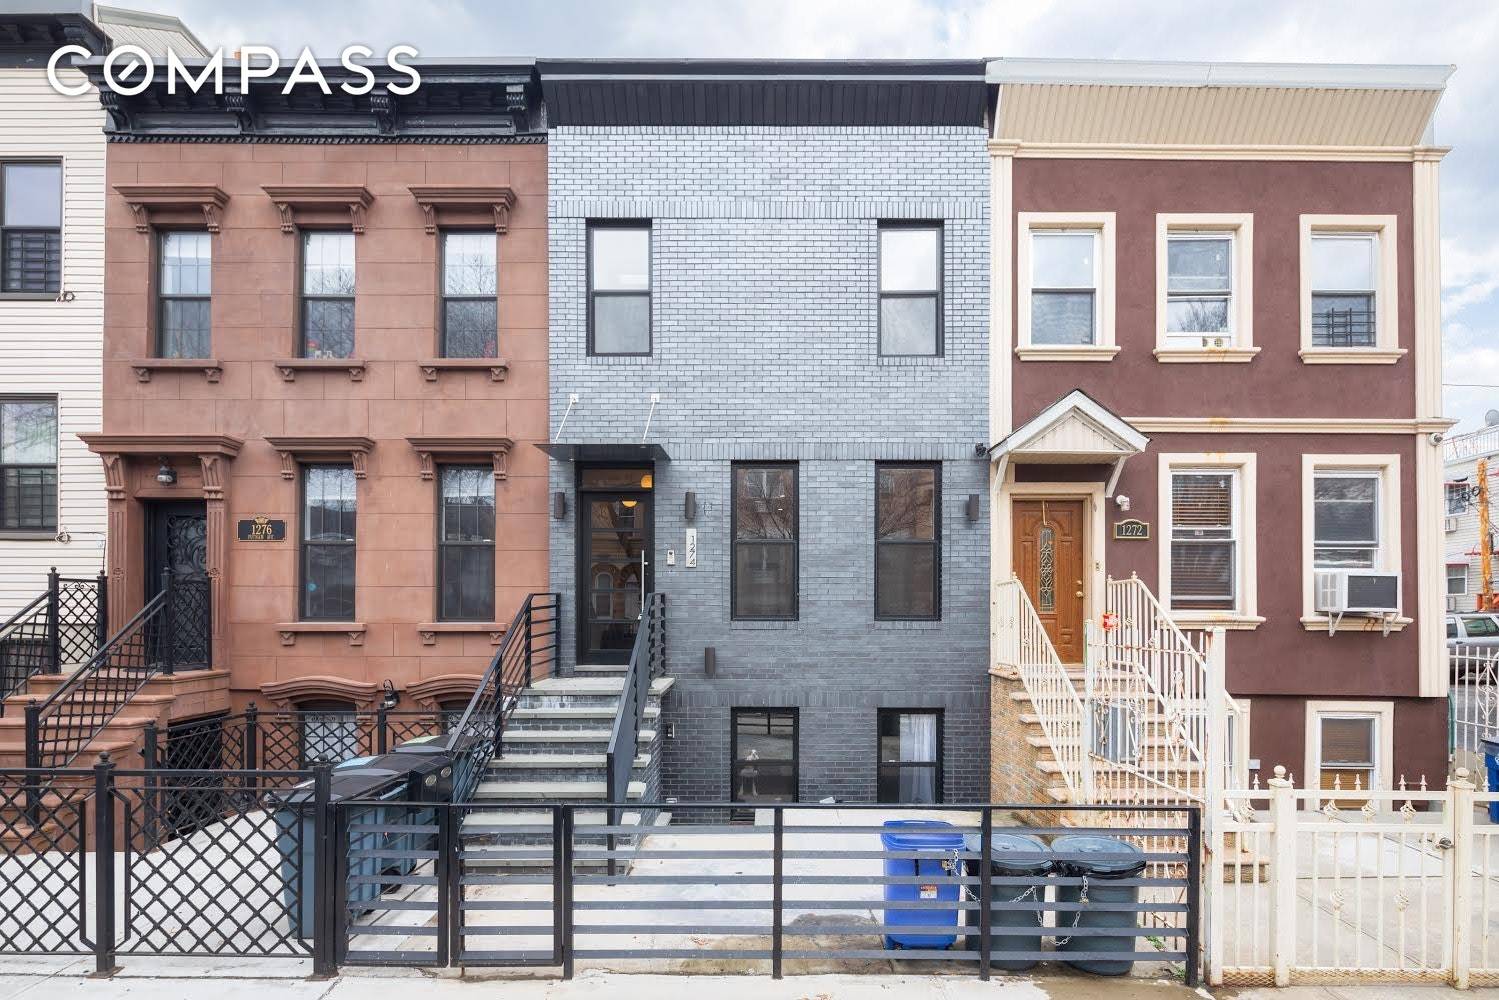 1274 Putnam, a modern and refined two family home in Bushwick.